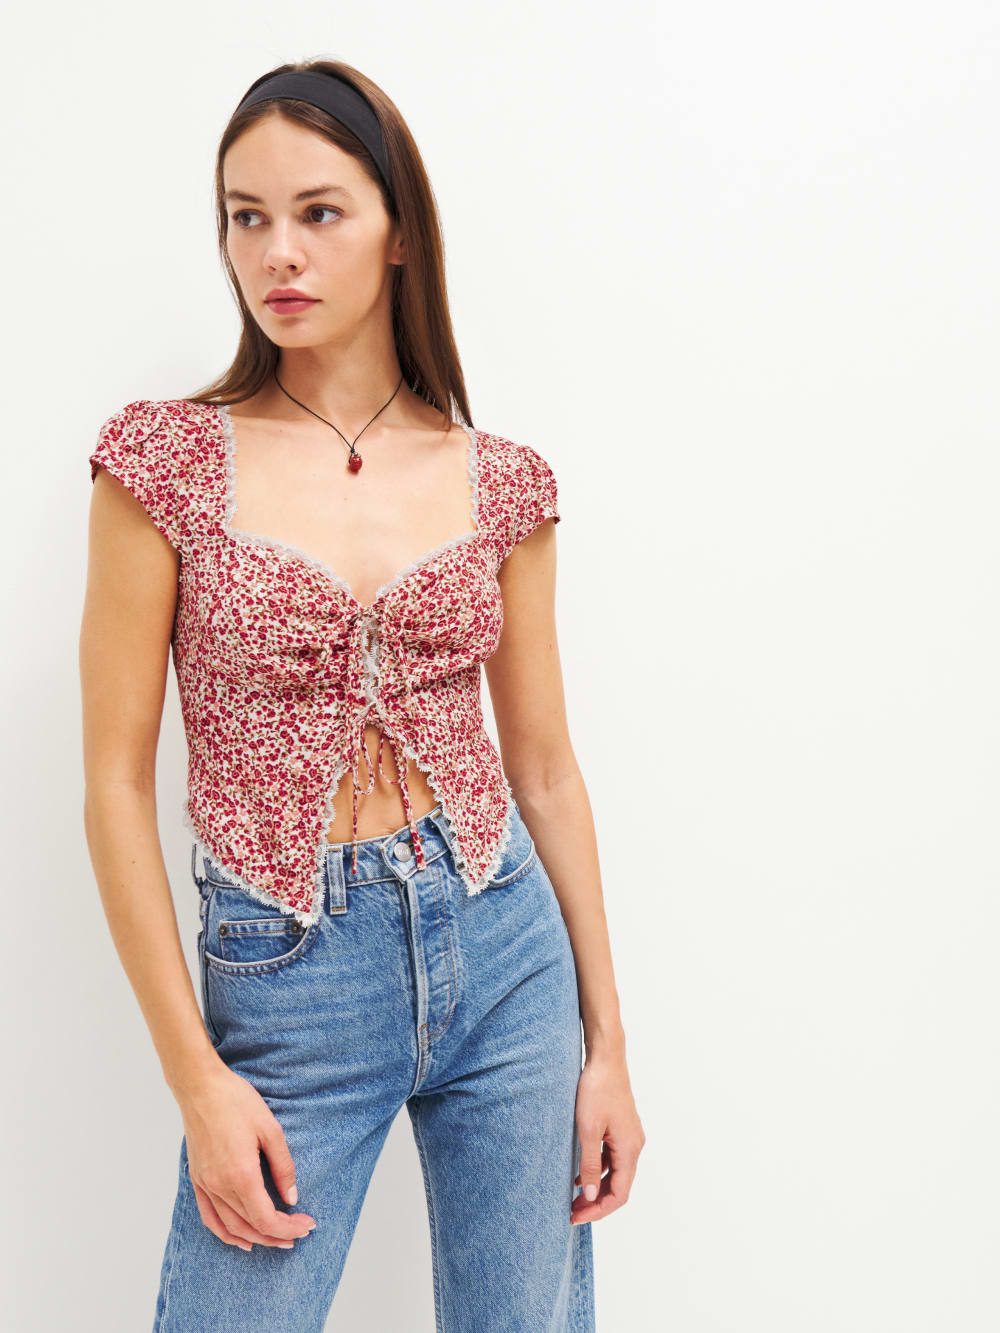 The Reformation safia top is a tie front top in a red floral print with cap sleeves, sweetheart neckline, and peekaboo open midriff. It has a white lace edging. 